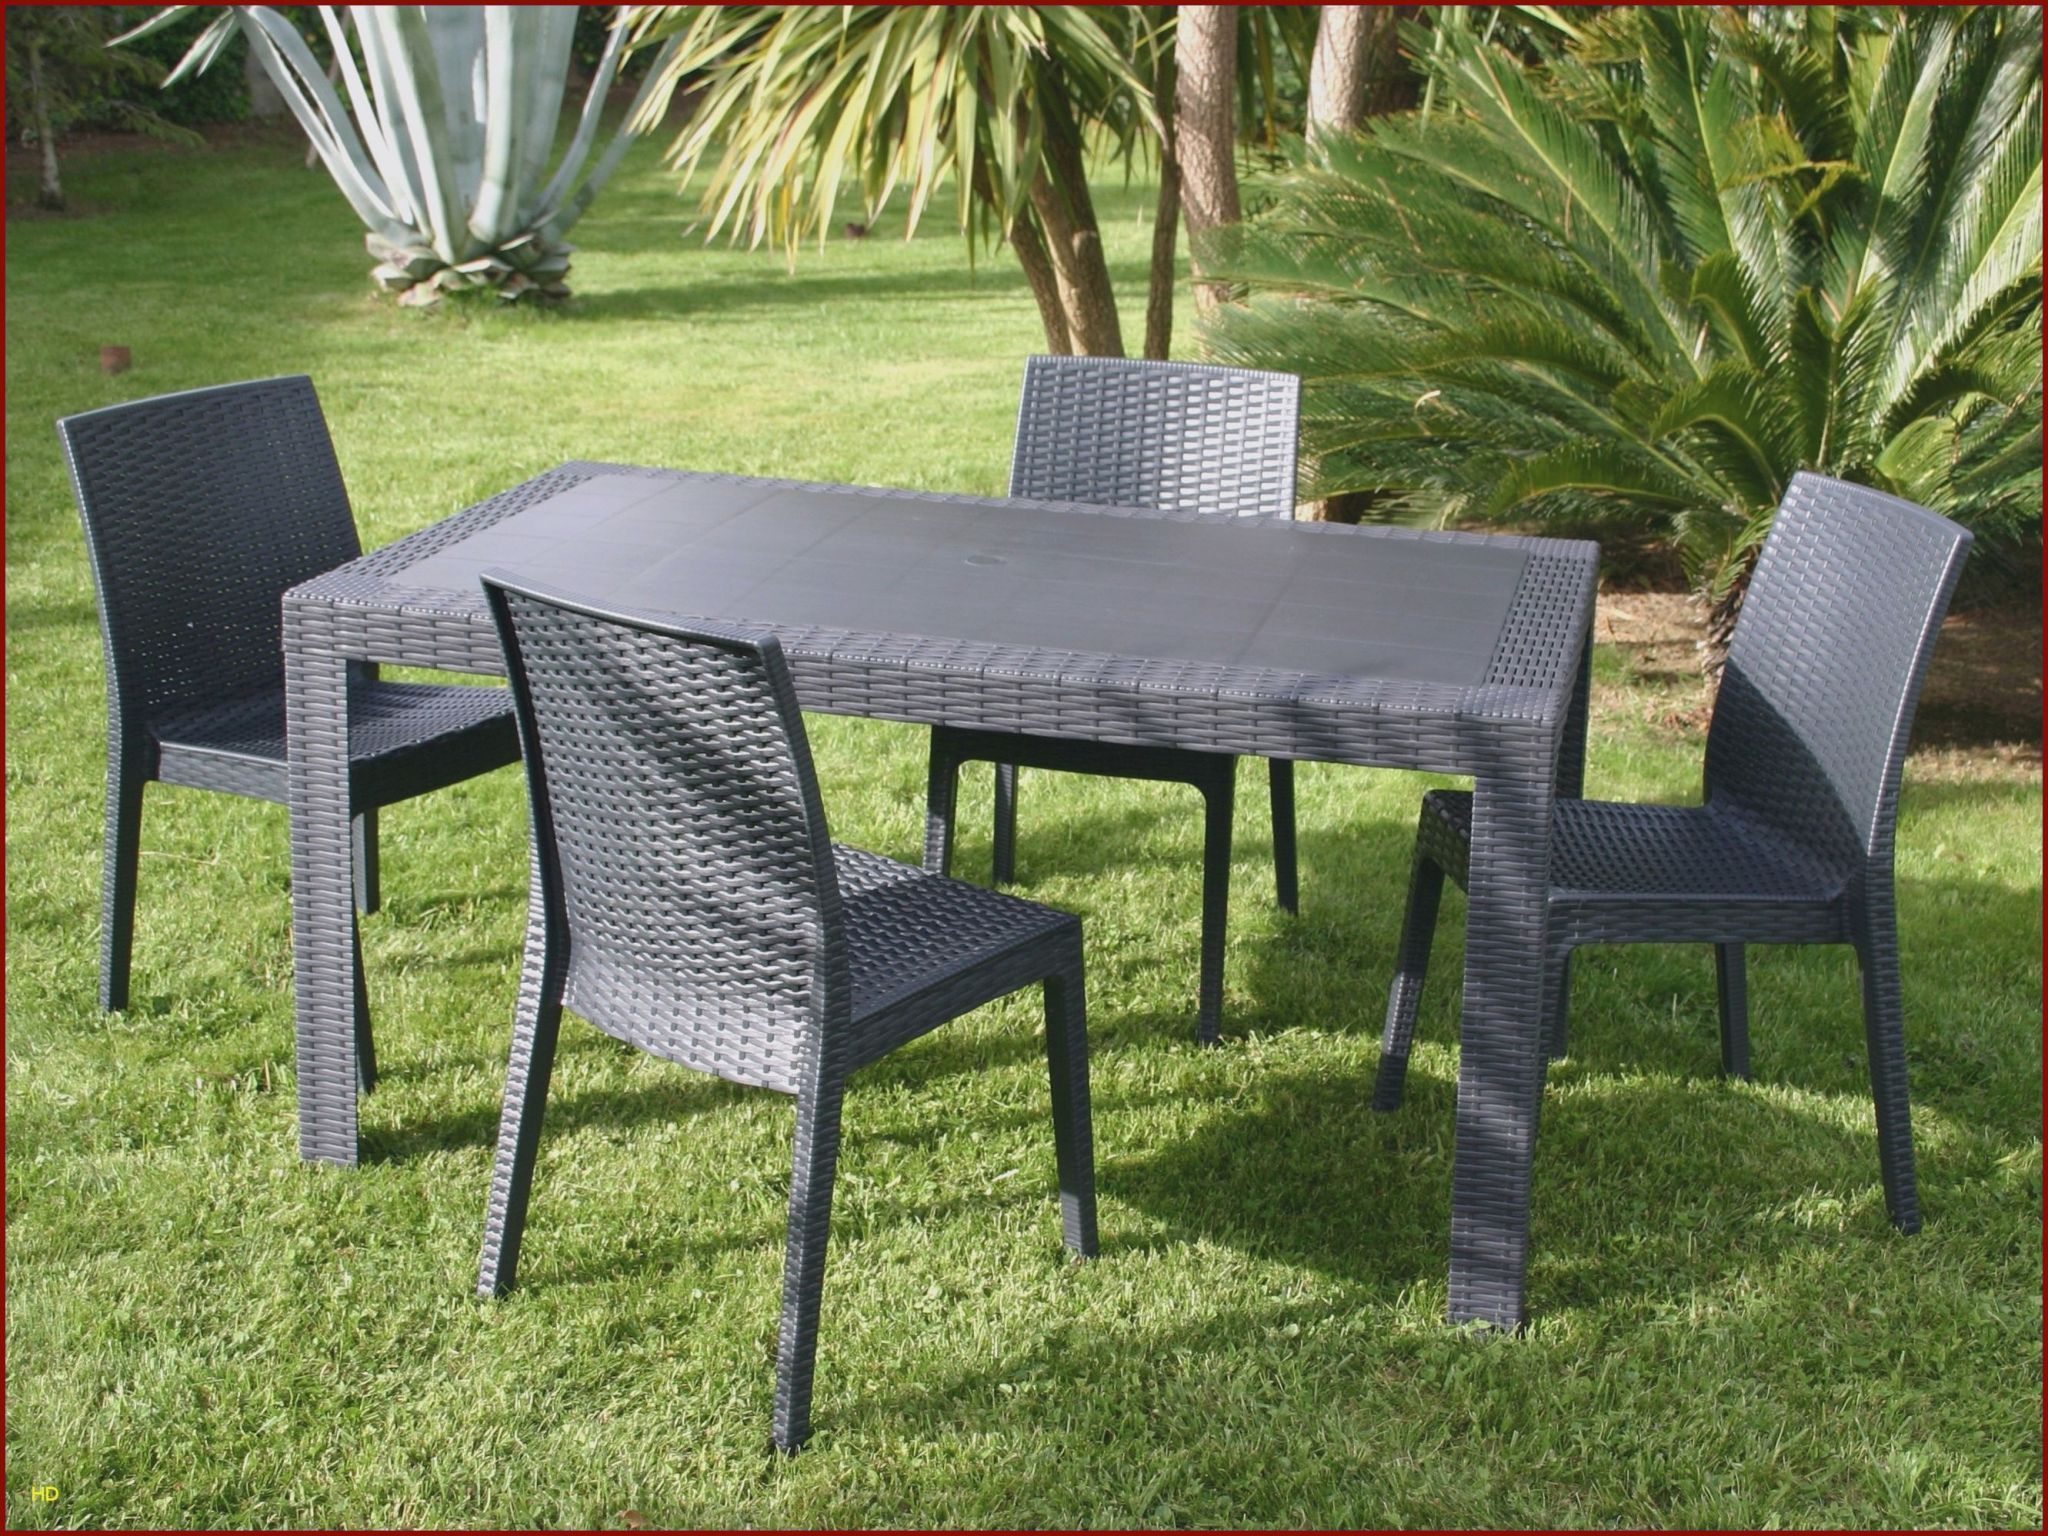 hesperide chaise genial chaises luxe chaise ice 0d table jardin resine lovely de hesperide chaise